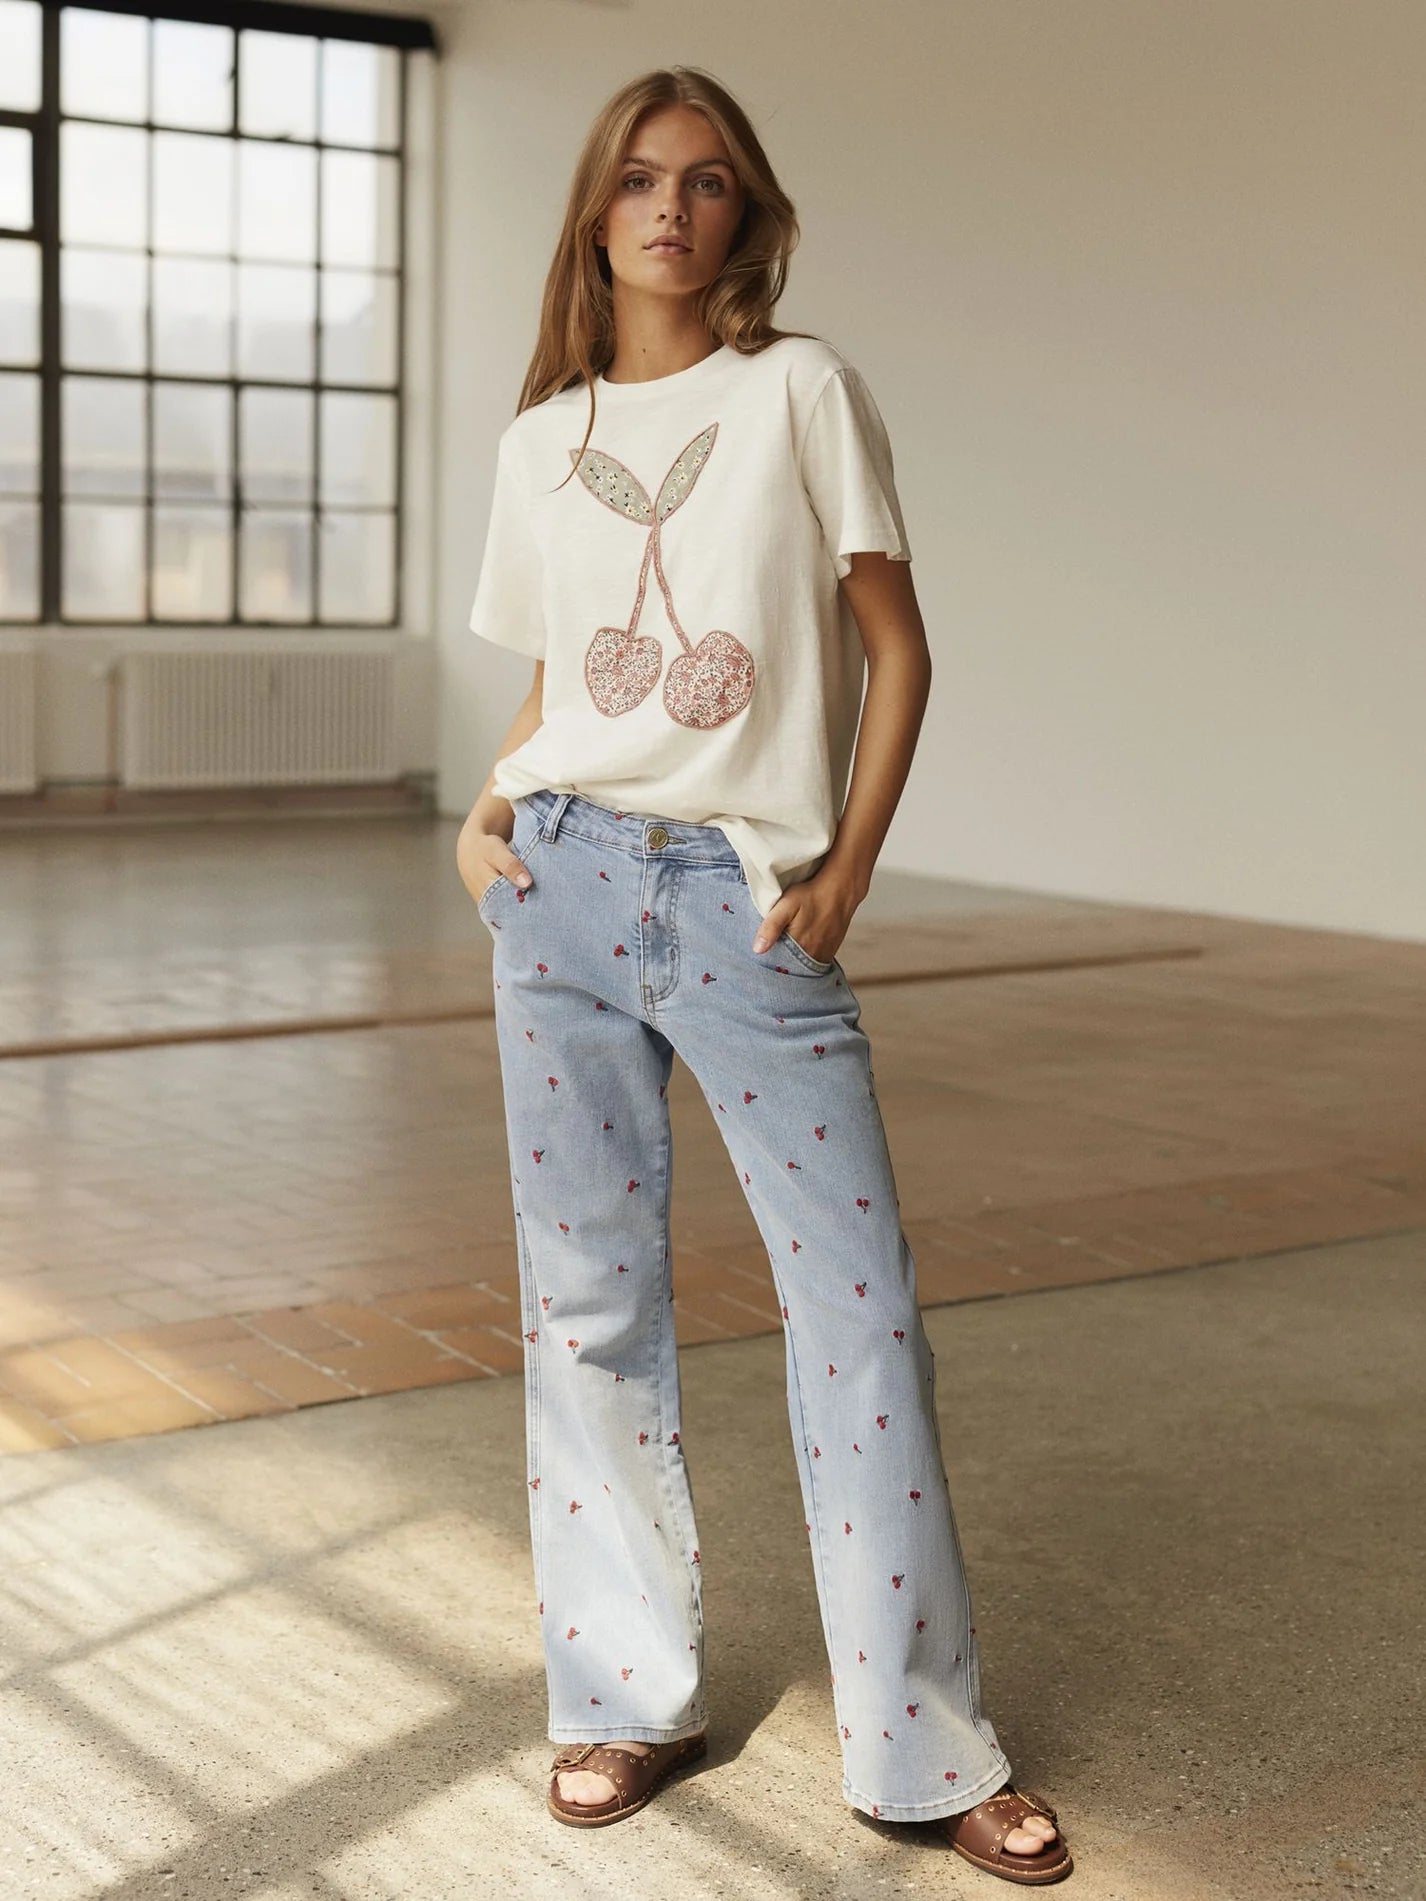 Load image into Gallery viewer, Sofie Schnoor Embroidered Cherry Jeans-NWT
